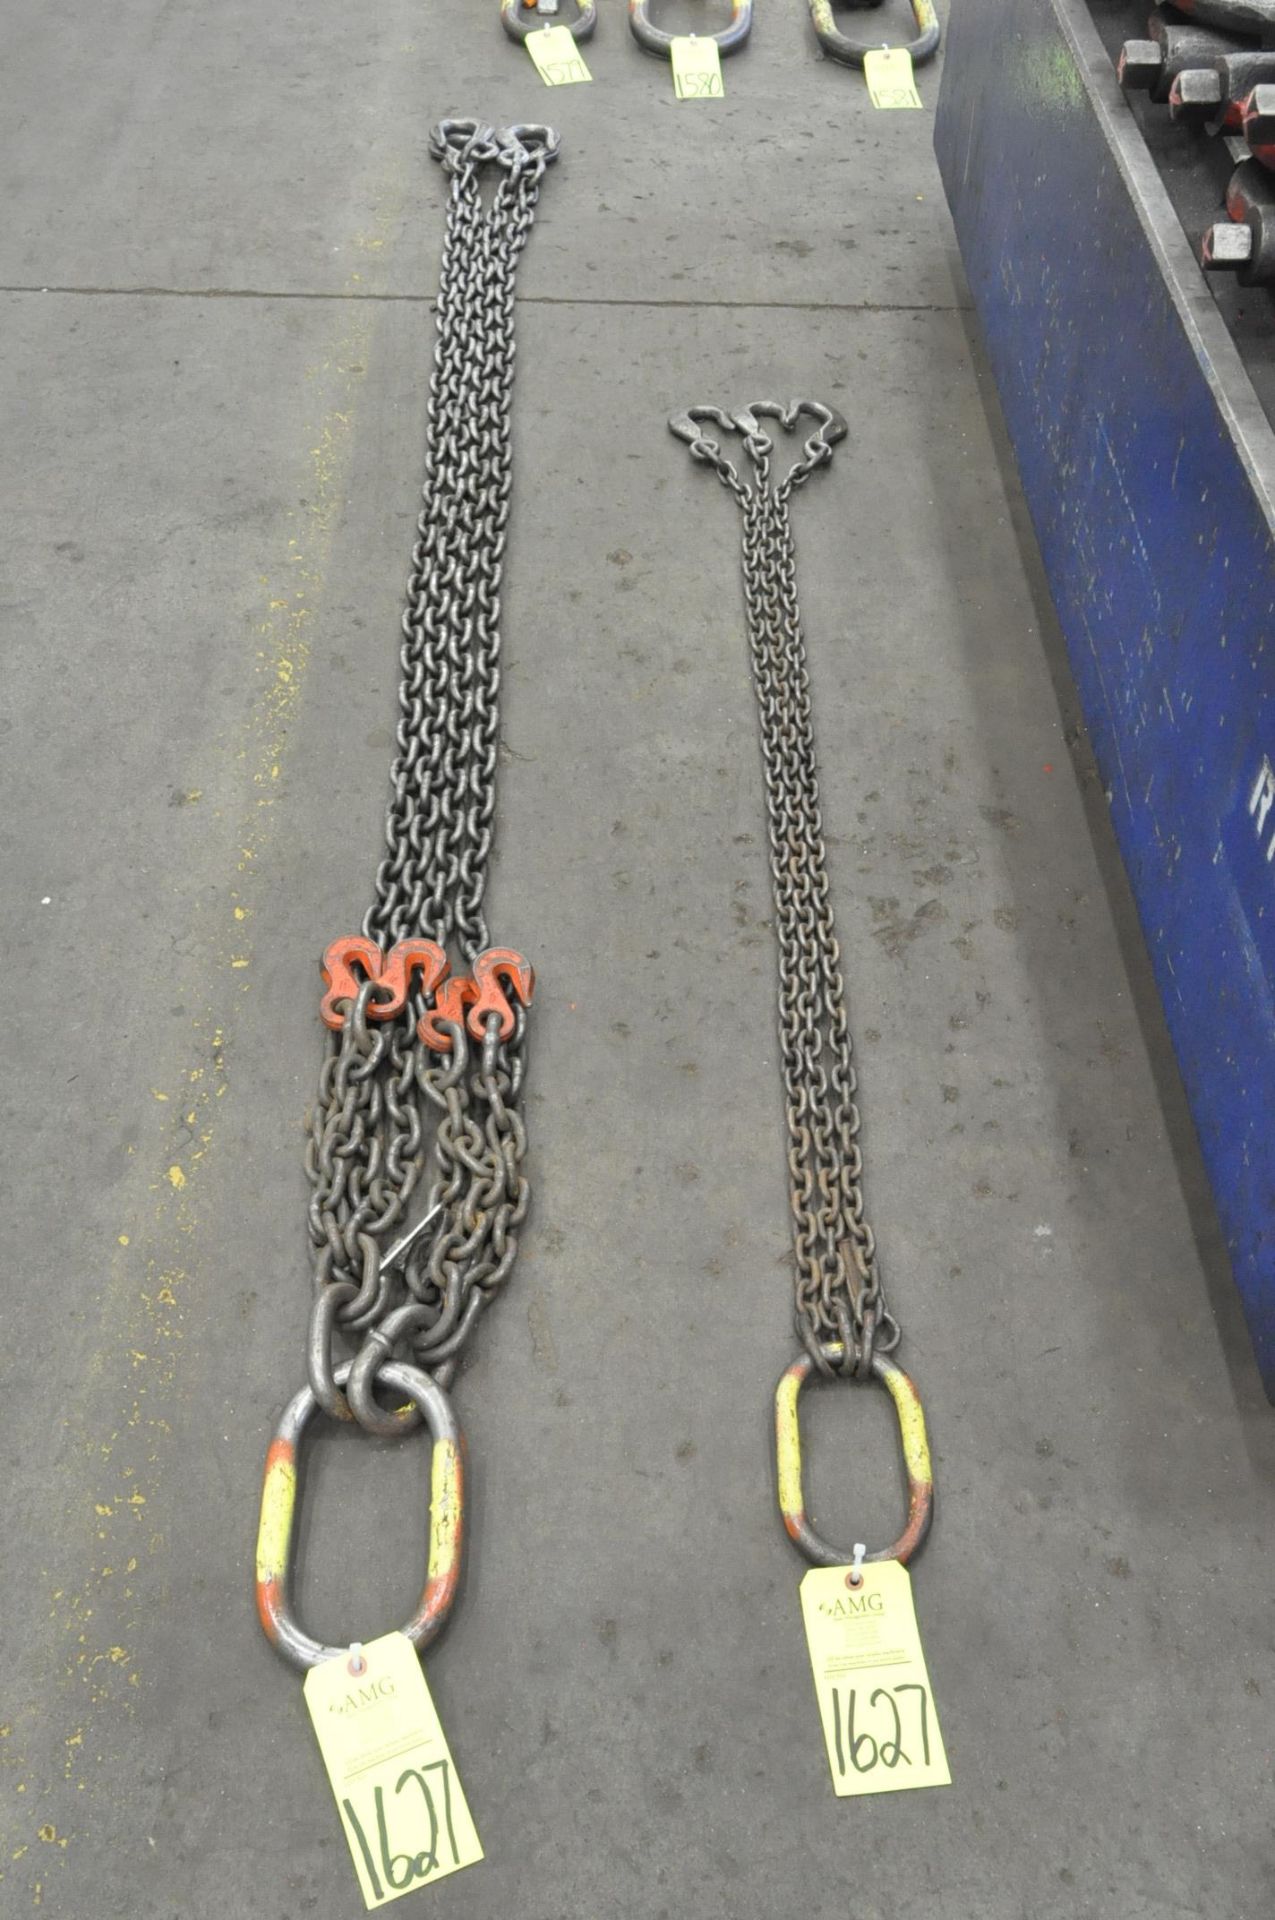 Lot-(1) 3/8" Link x 8' Long 4-Hook Chain Sling with (4) Chokers, and (1) 9/32" Link x 5' Long 3-Hook